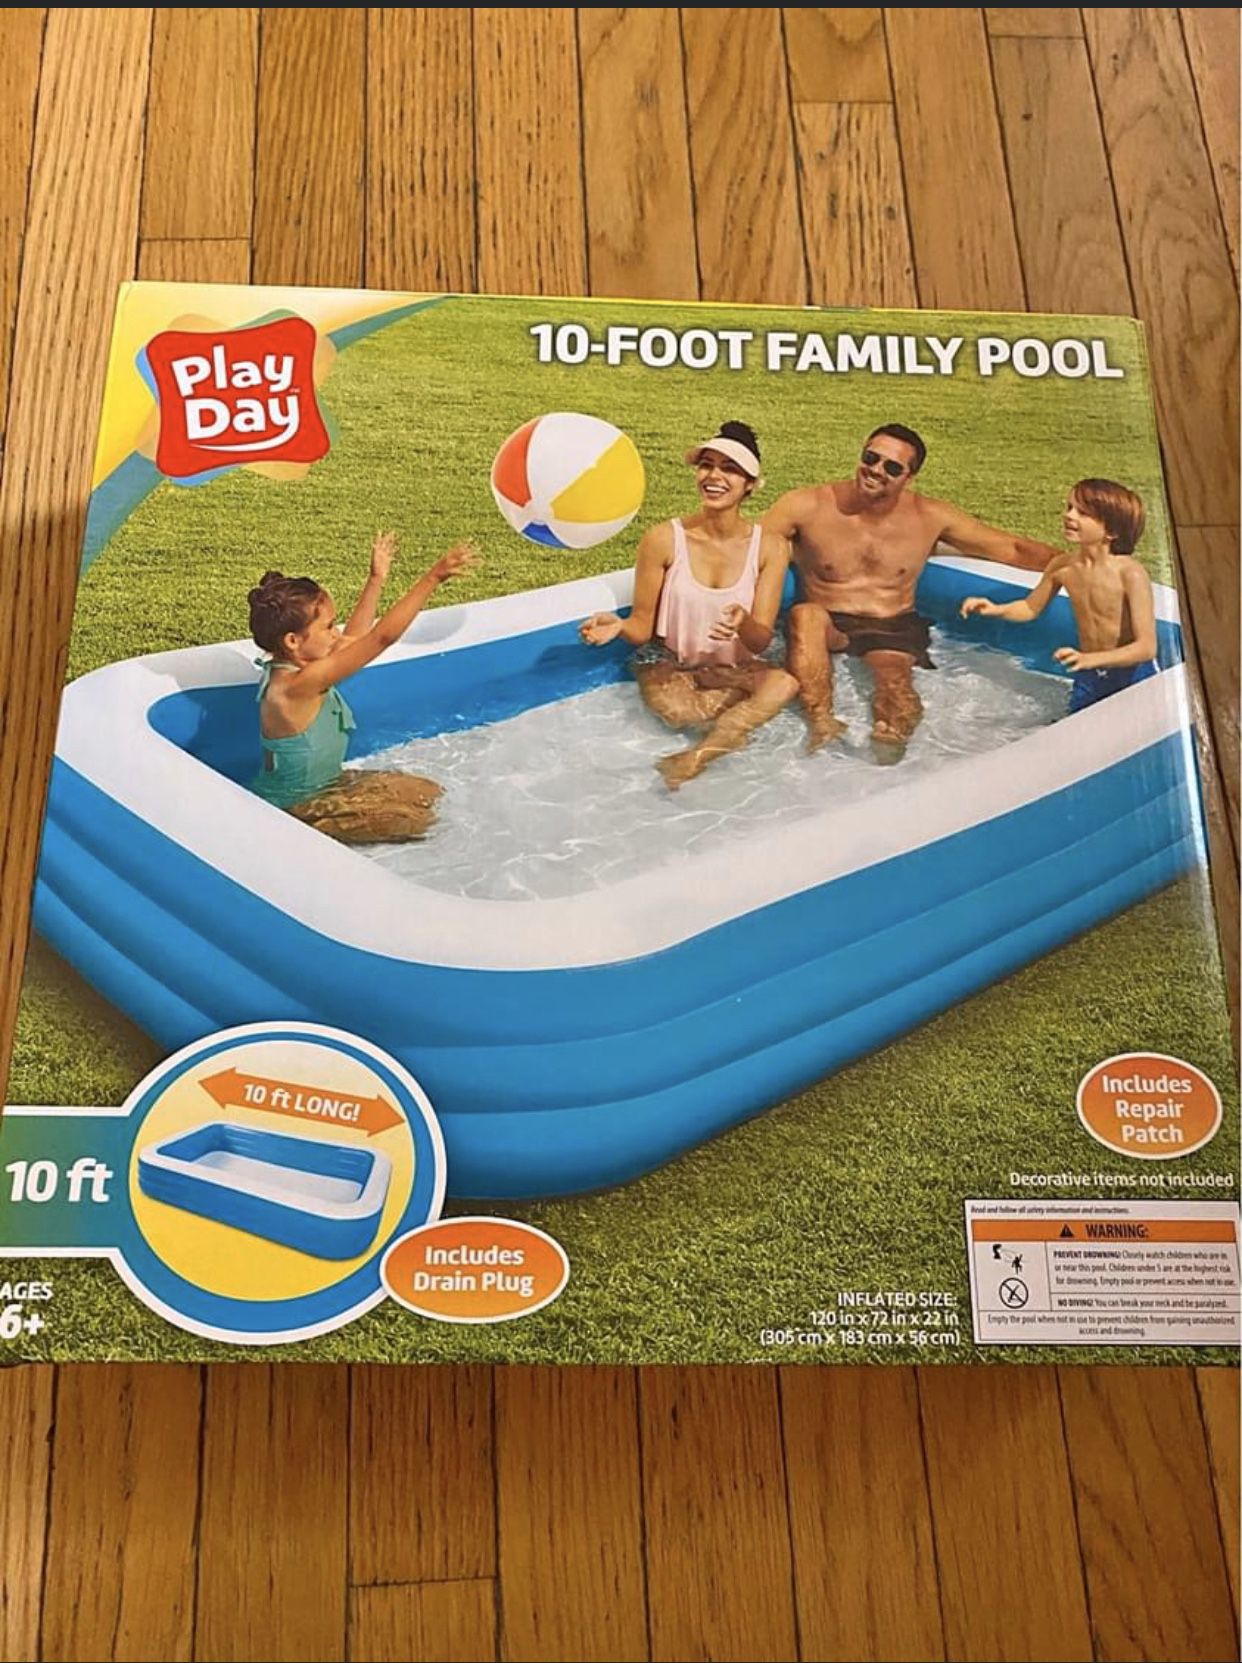 Play Day 10 foot Family Pool BRAND NEW Bulk Discount